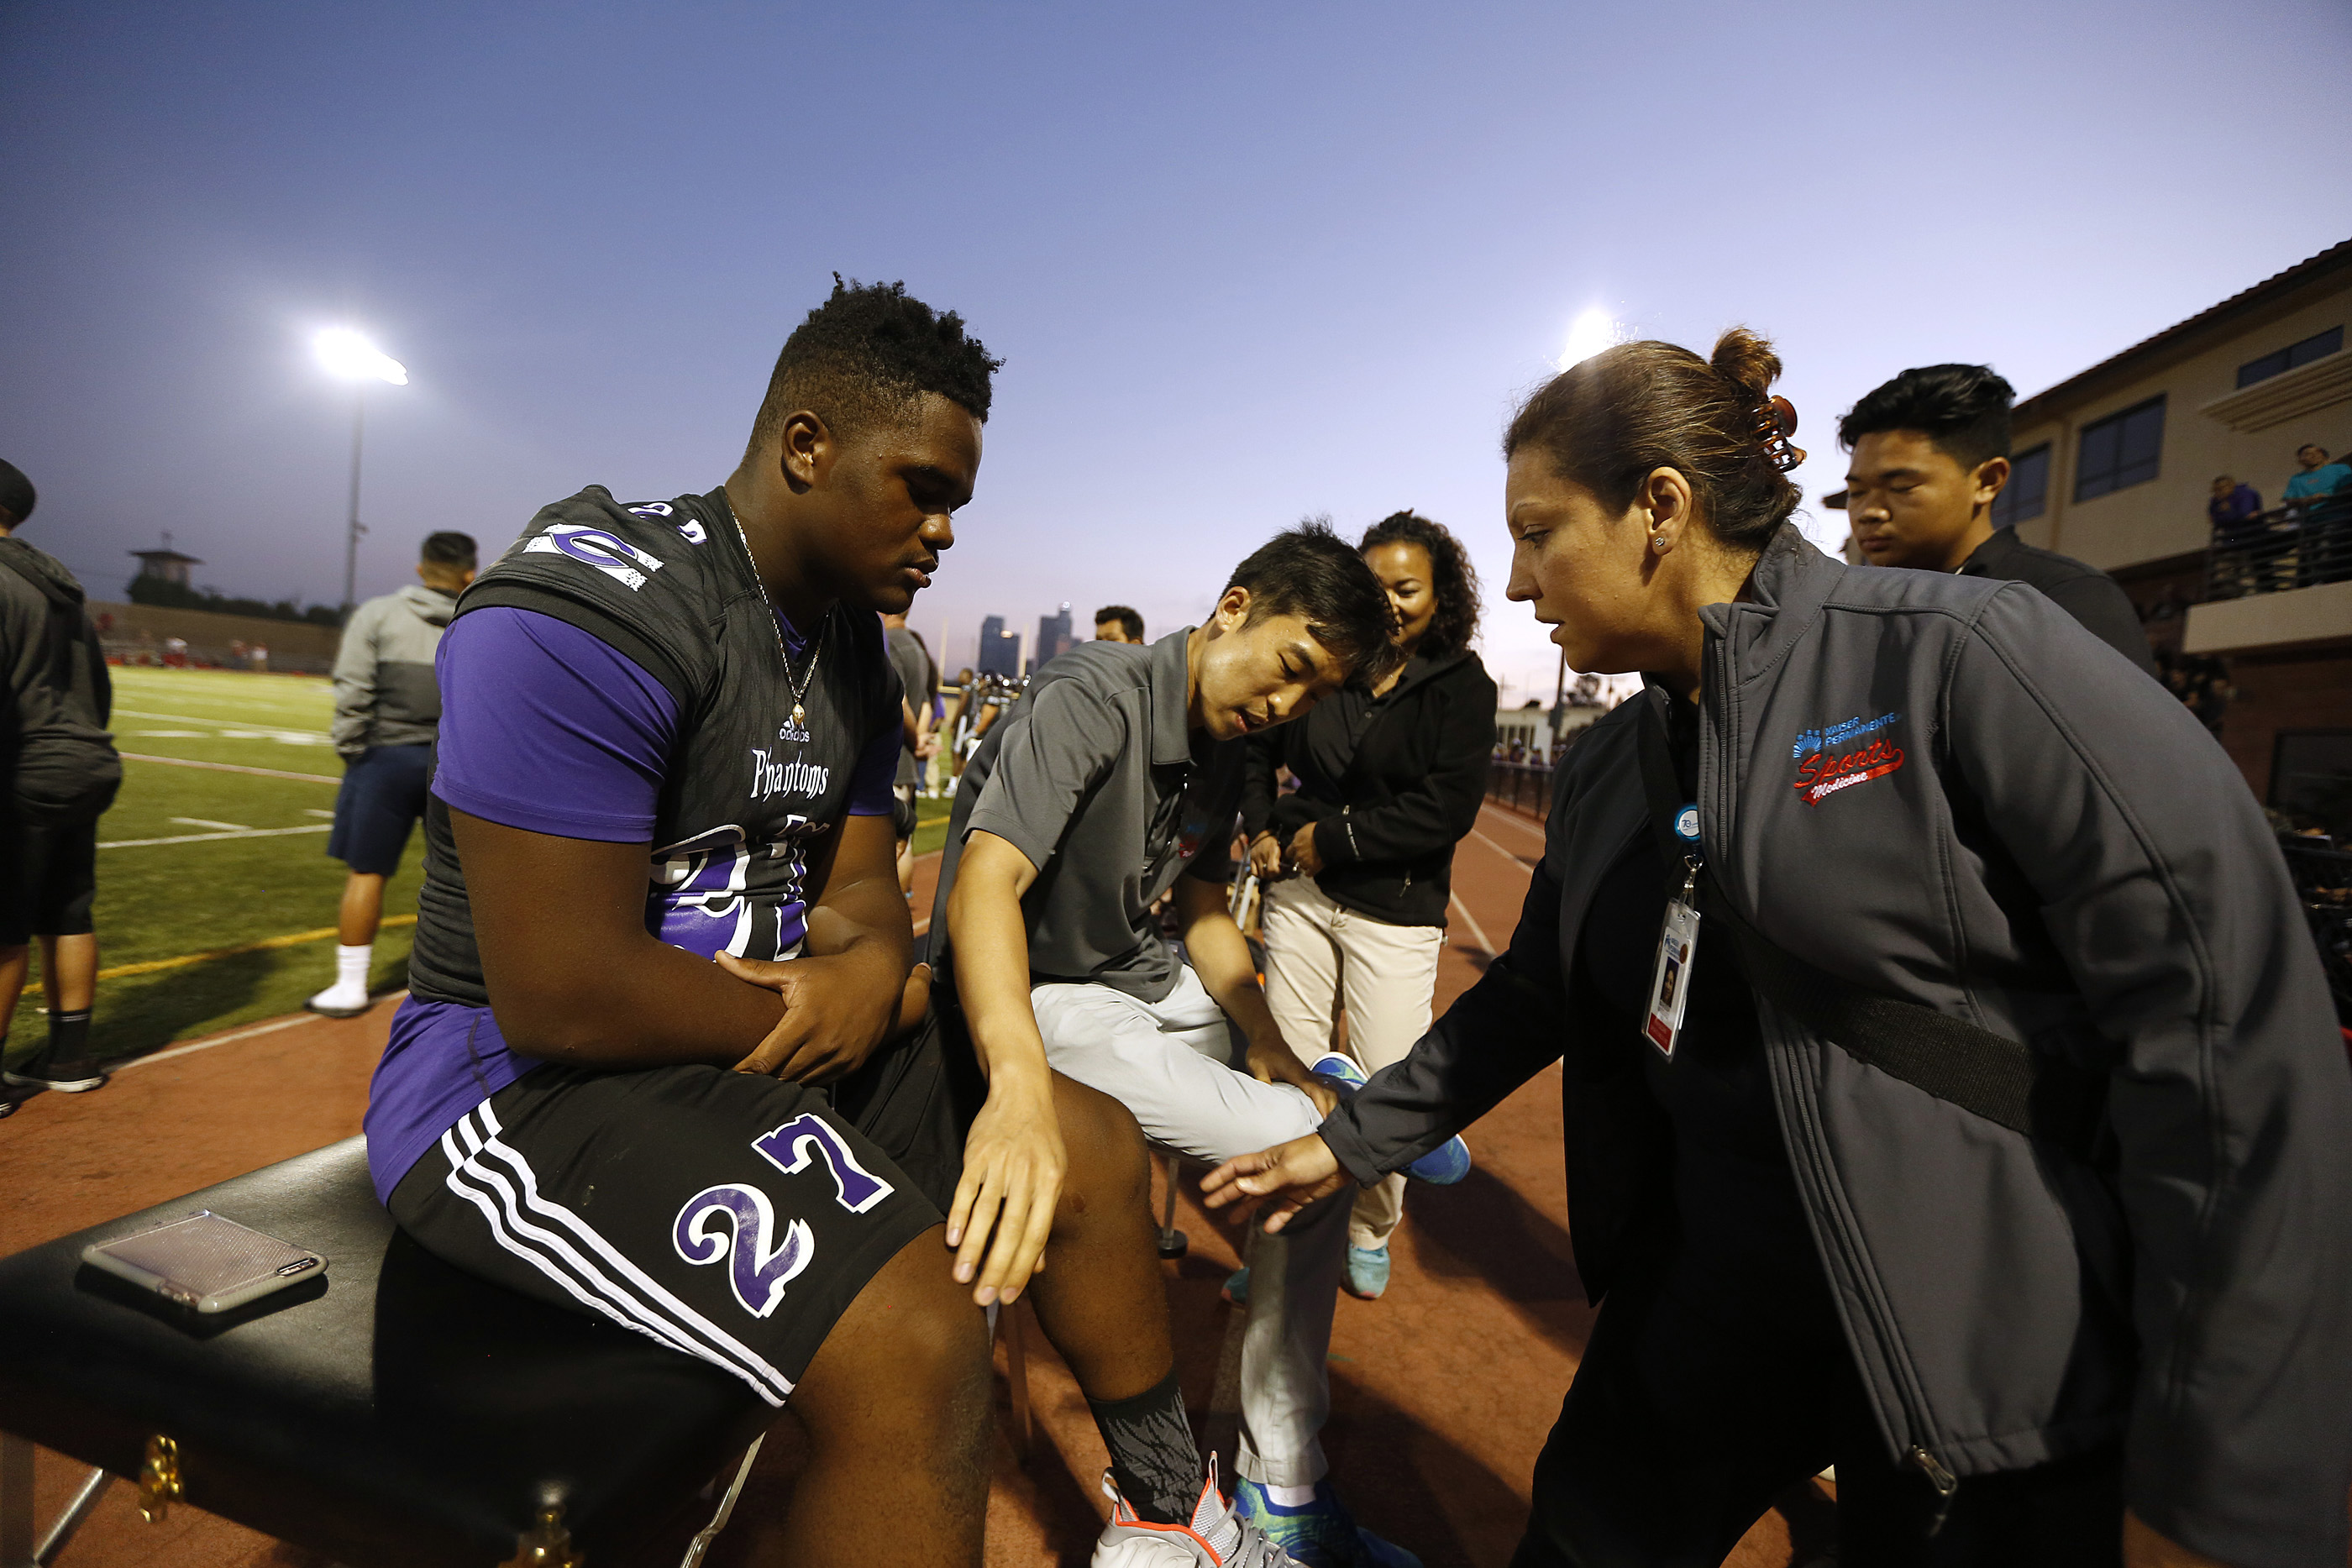 09/03/16/ LOS ANGELES/Dr. Marissa Vasquez, Sports Medicine Specialist, Kaiser Permanente, treats Cathedral Phantoms football player Terence Simon Jr. during a game at Cathedral High School in Los Angeles. (Photo by Aurelia Ventura/ La Opinion)